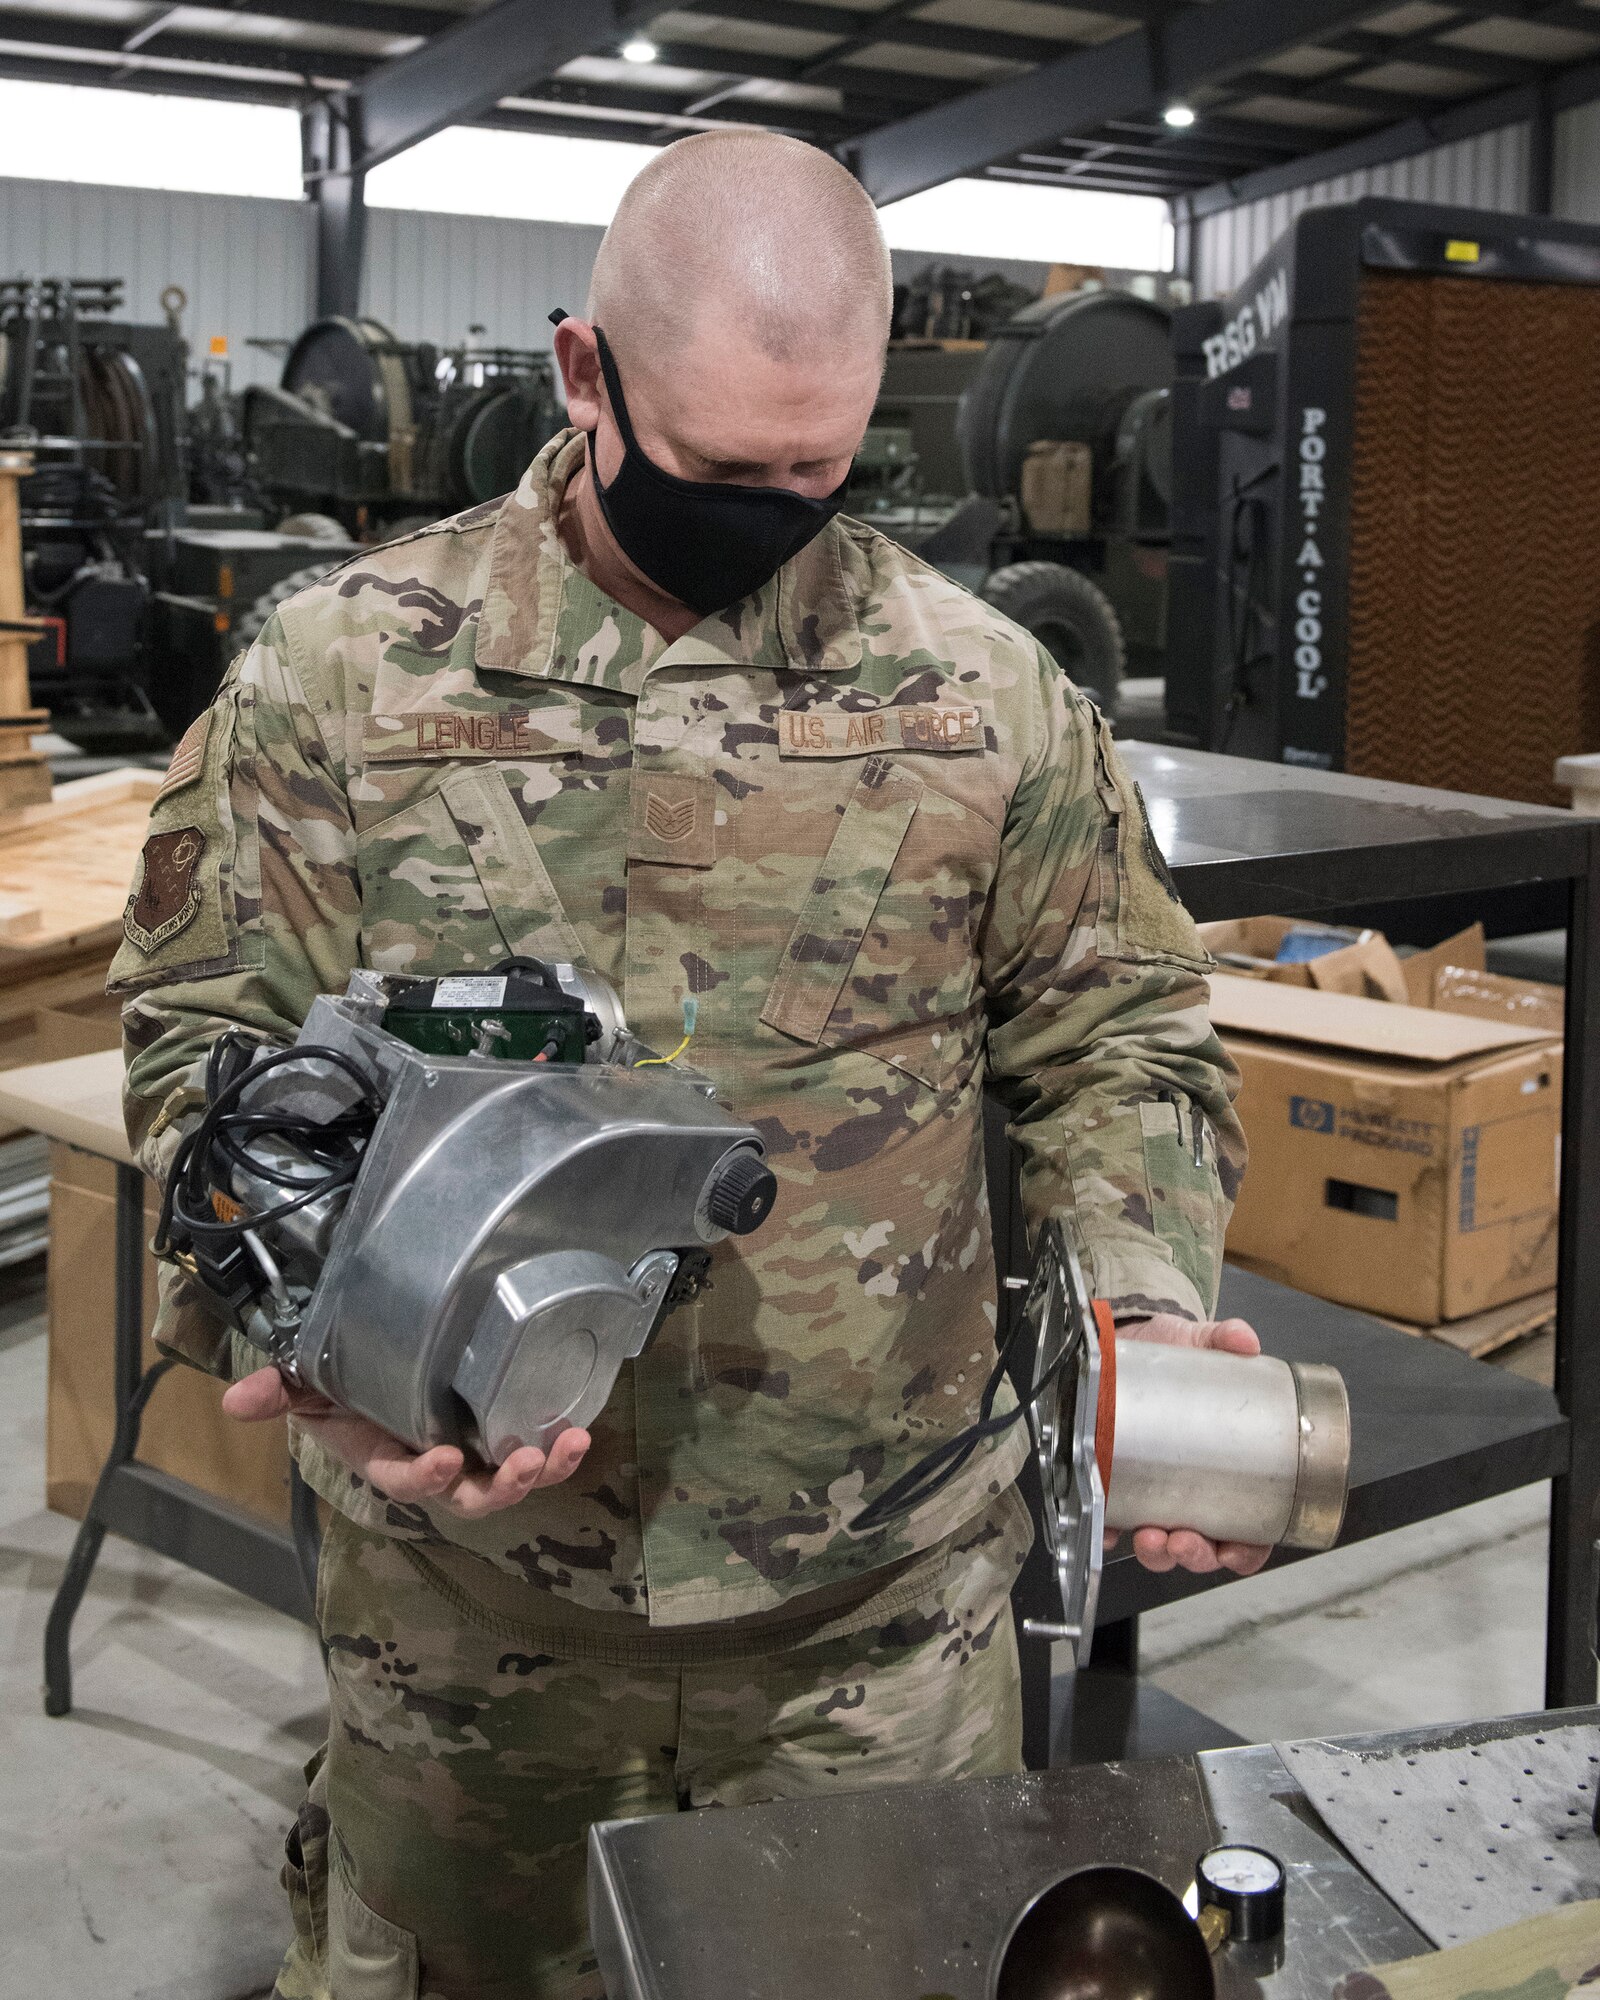 Tech. Sgt. Michael Lengle preps a burner to load onto a truck while preparing to deploy to the Capitol region in support of service members in the D.C. area for the 59th Presidential Inauguration